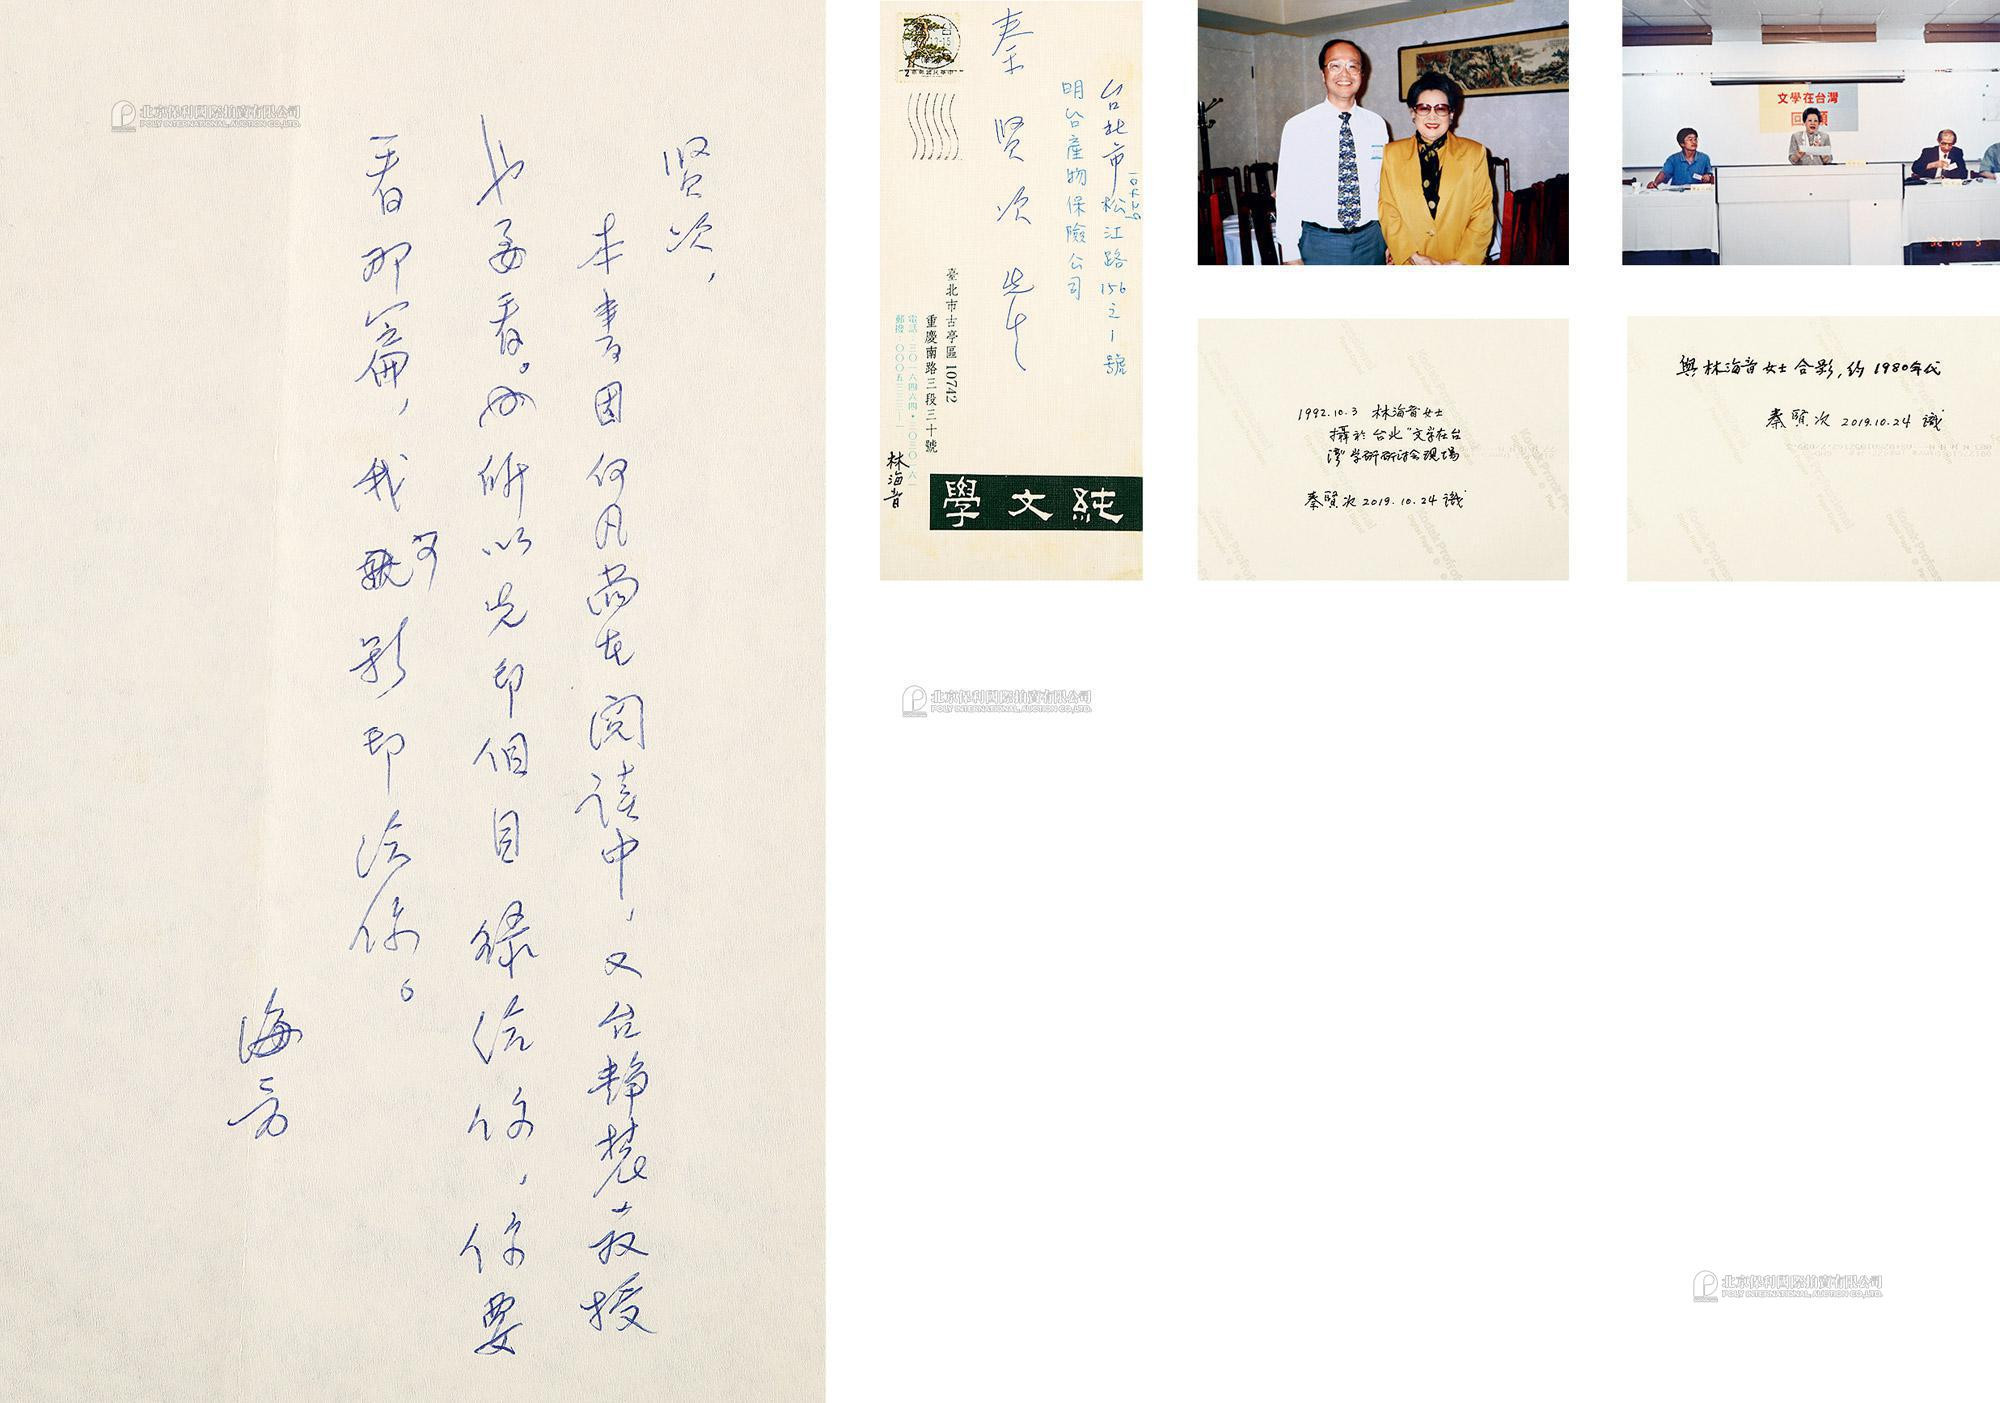 One letter of one page by Lin Haiyin to Qin Xianci， with original cover and two inscribed photos of Qin Xianci and Lin Haiyin by Qin Xianci